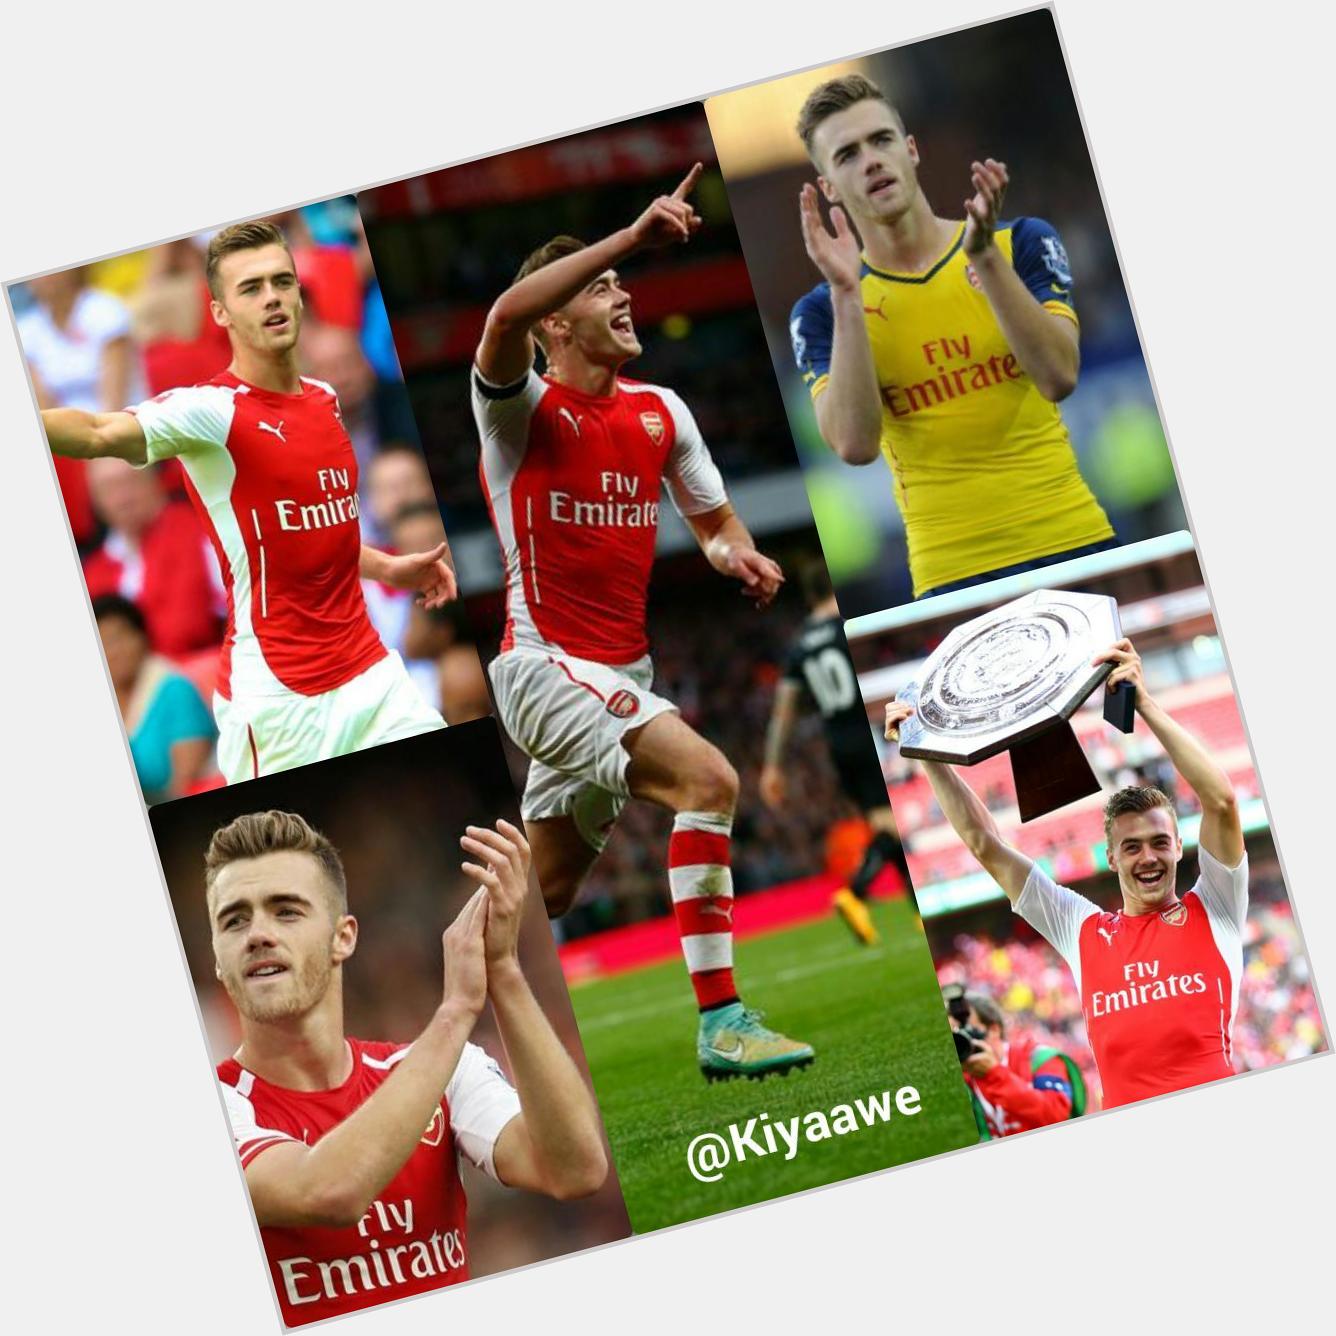 Happy Birthday to Calum Chambers who turns 20 today! He has a bright future with   